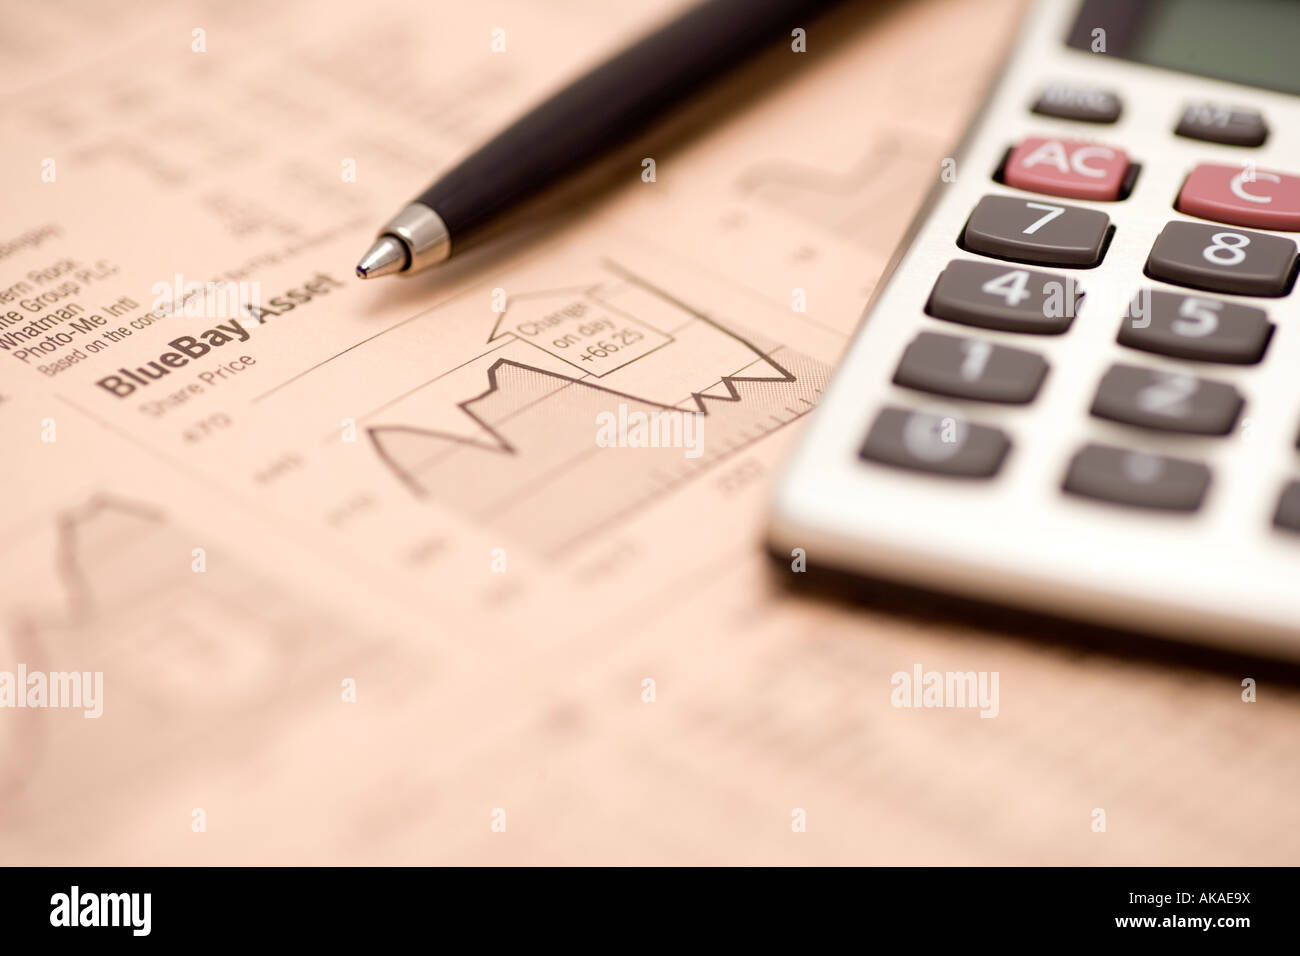 Business newspaper financial pages stocks and shares studying the financial markets with pen and calculator Stock Photo